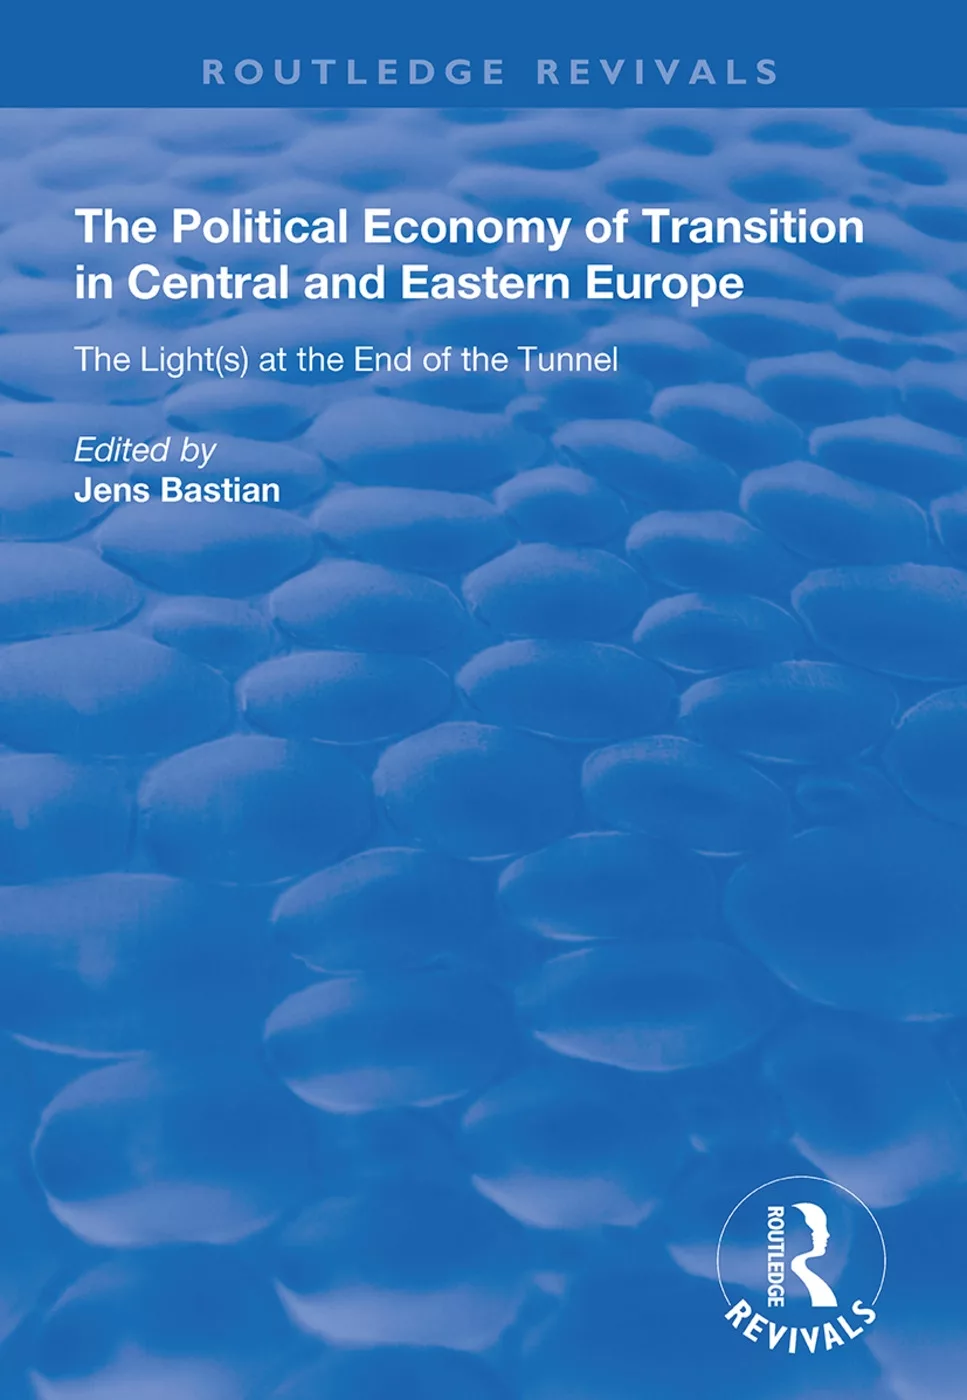 The Political Economy of Transition in Central and Eastern Europe: The Light(s) at the End of the Tunnel